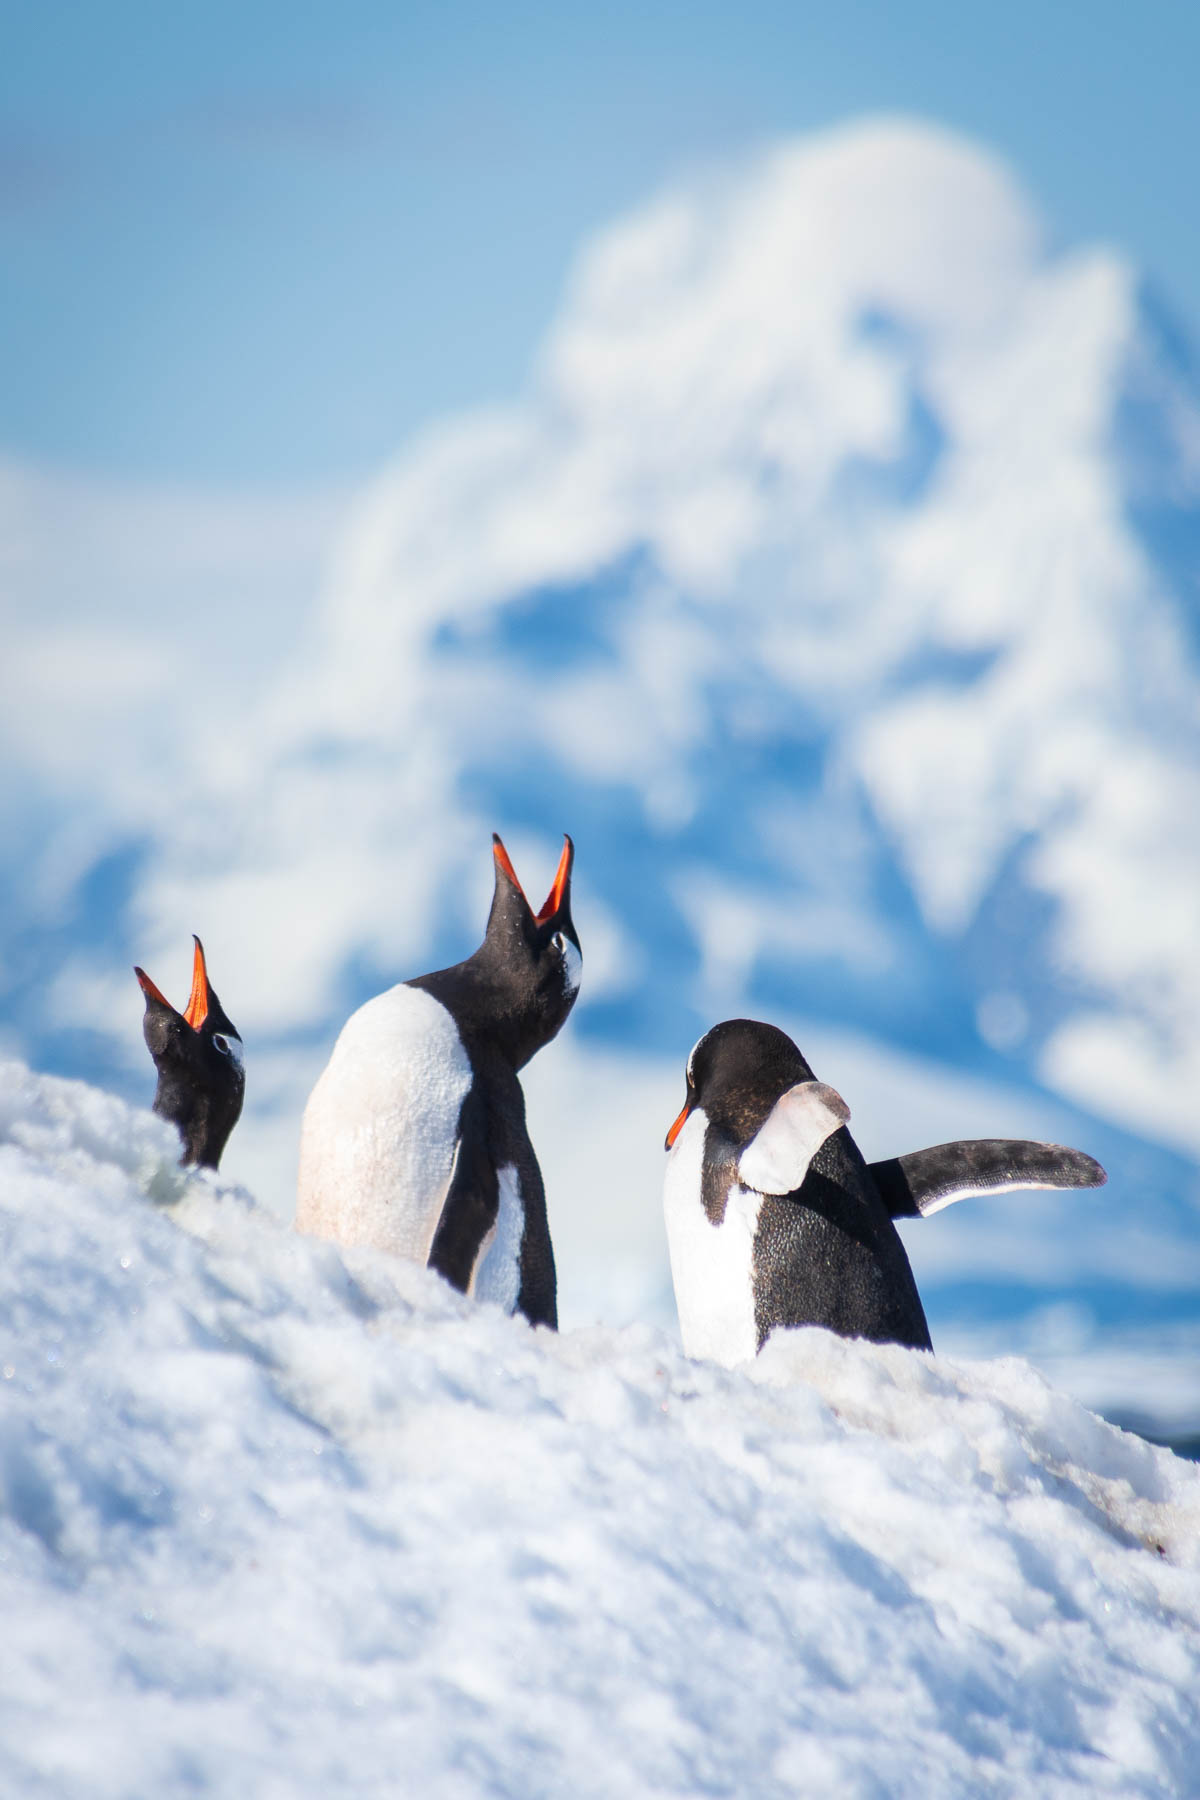 Gentoo penguins making a lot of noise with mountains in the background.